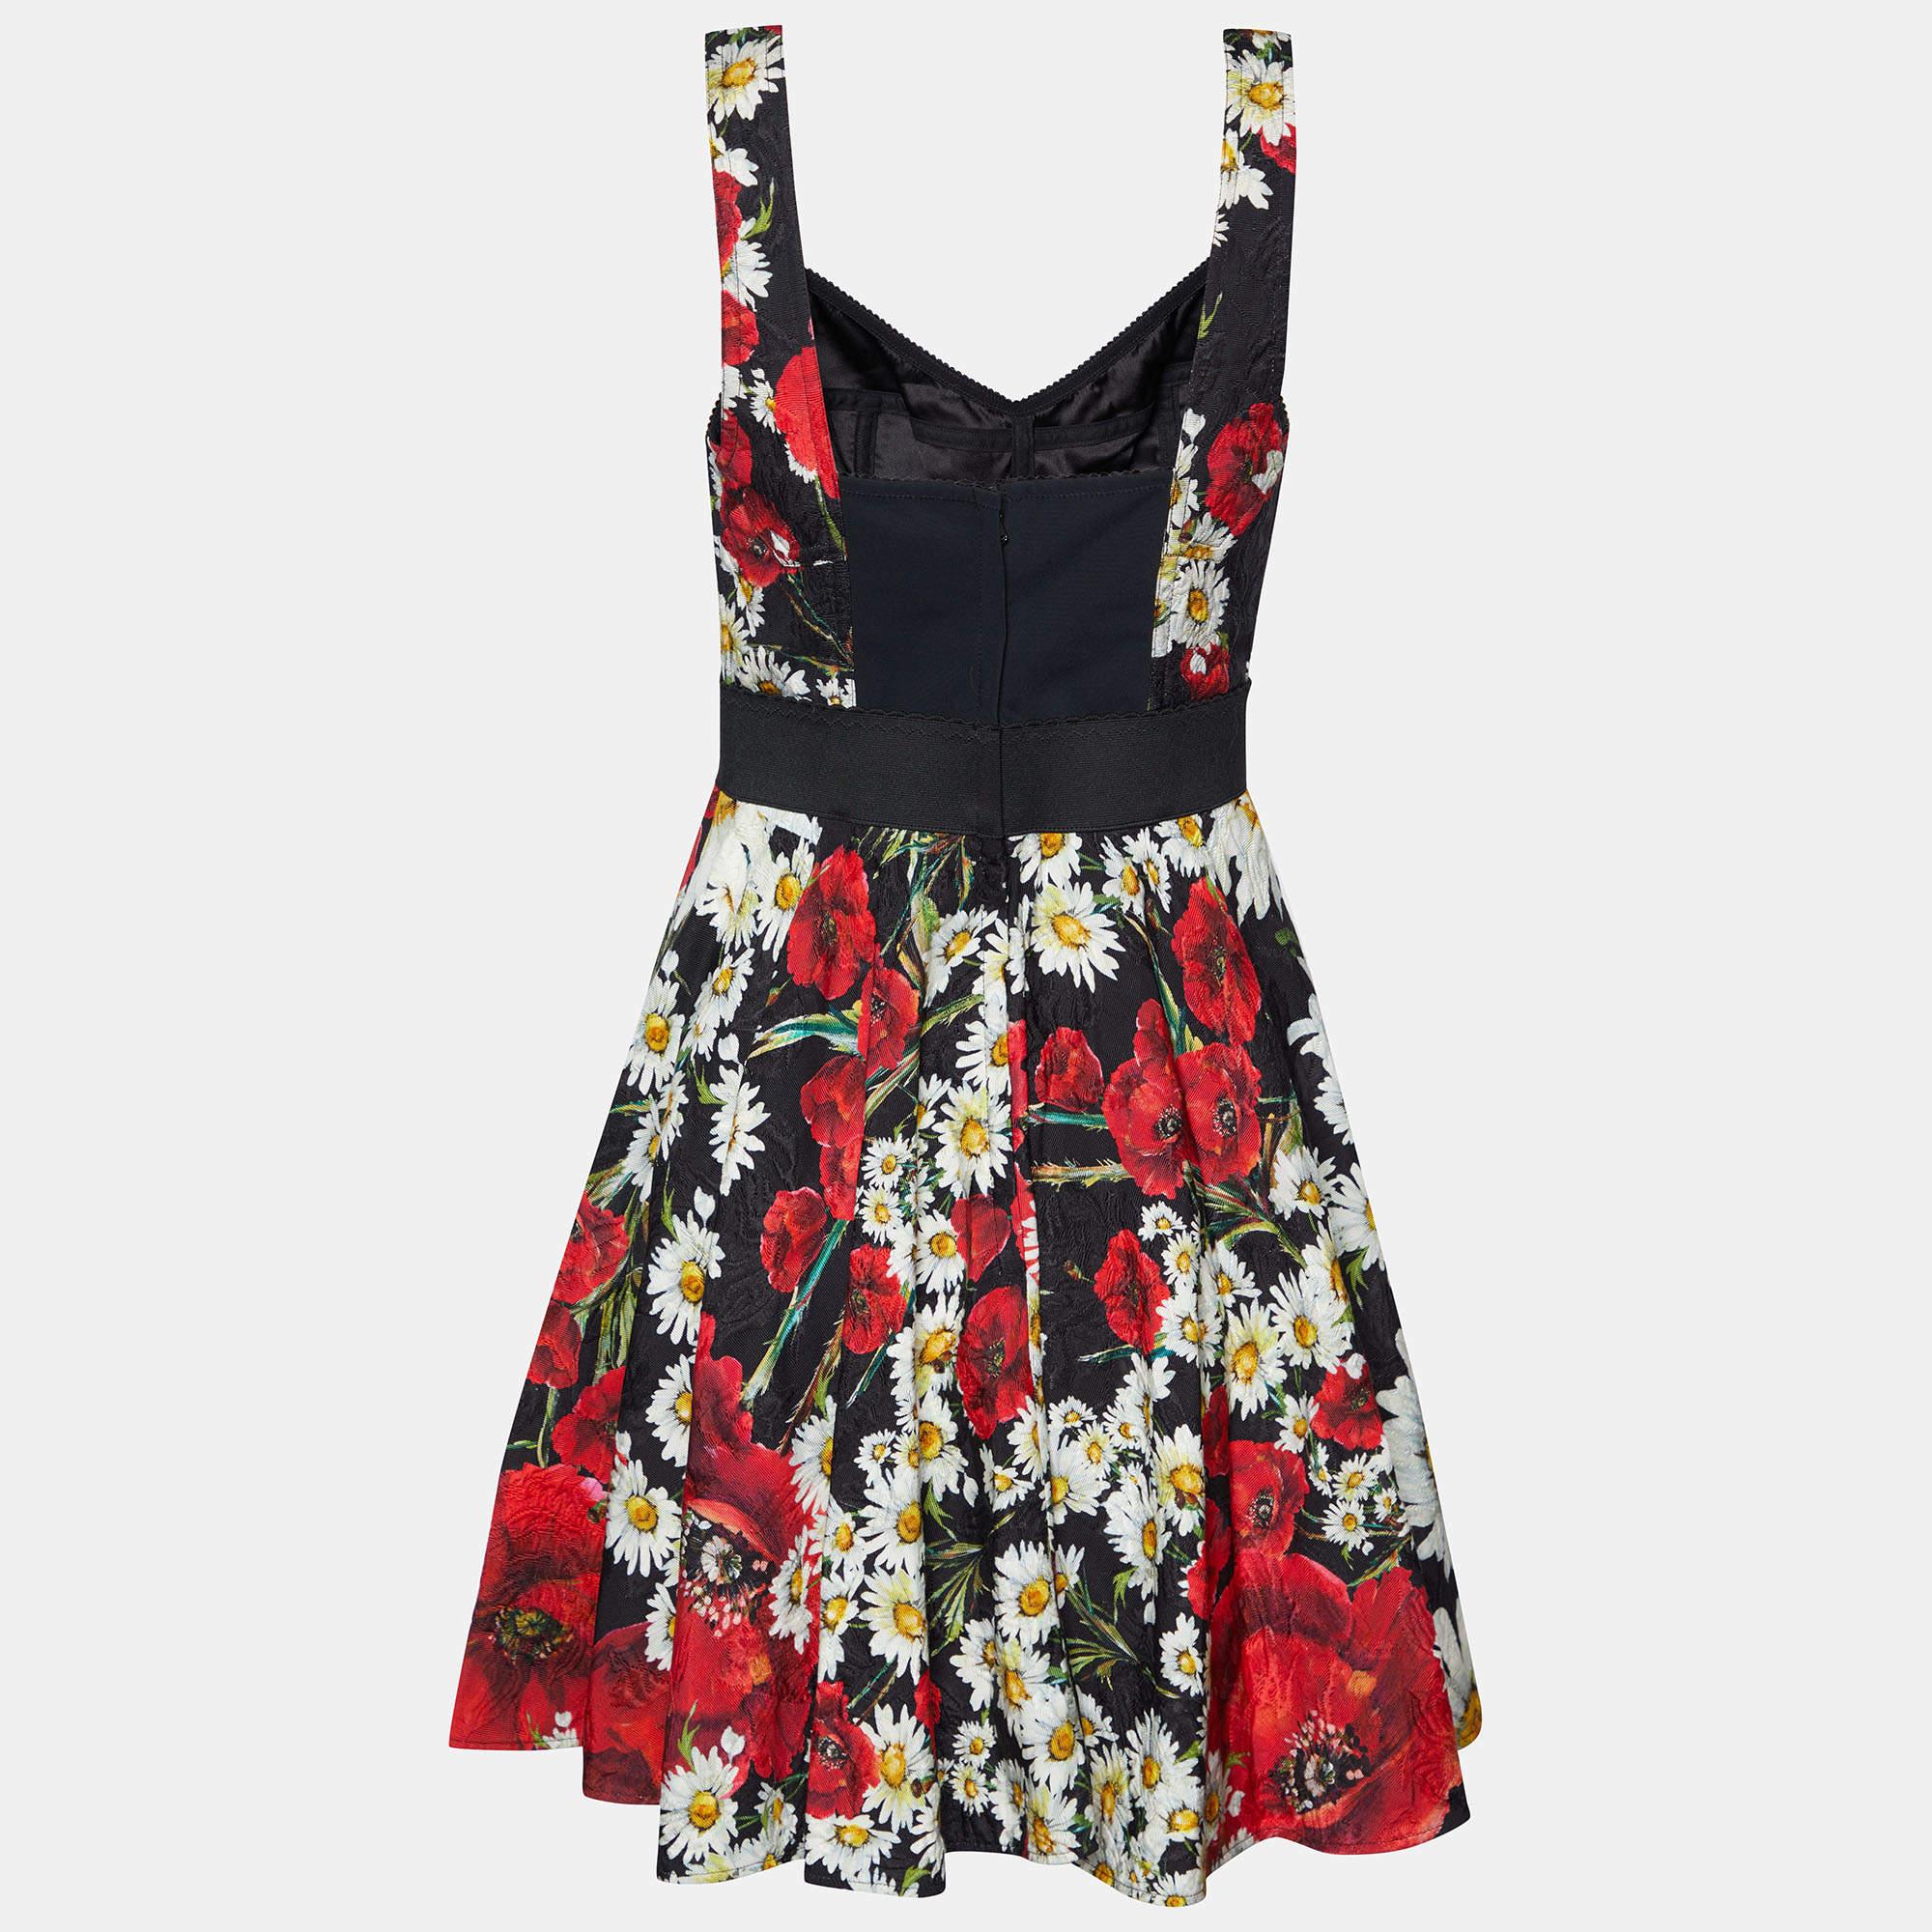 This dress designed by Dolce & Gabbana is here to a dash of panache to your ensemble. It is stitched using comfortable, good-quality fabric and flaunts an attractive silhouette.

